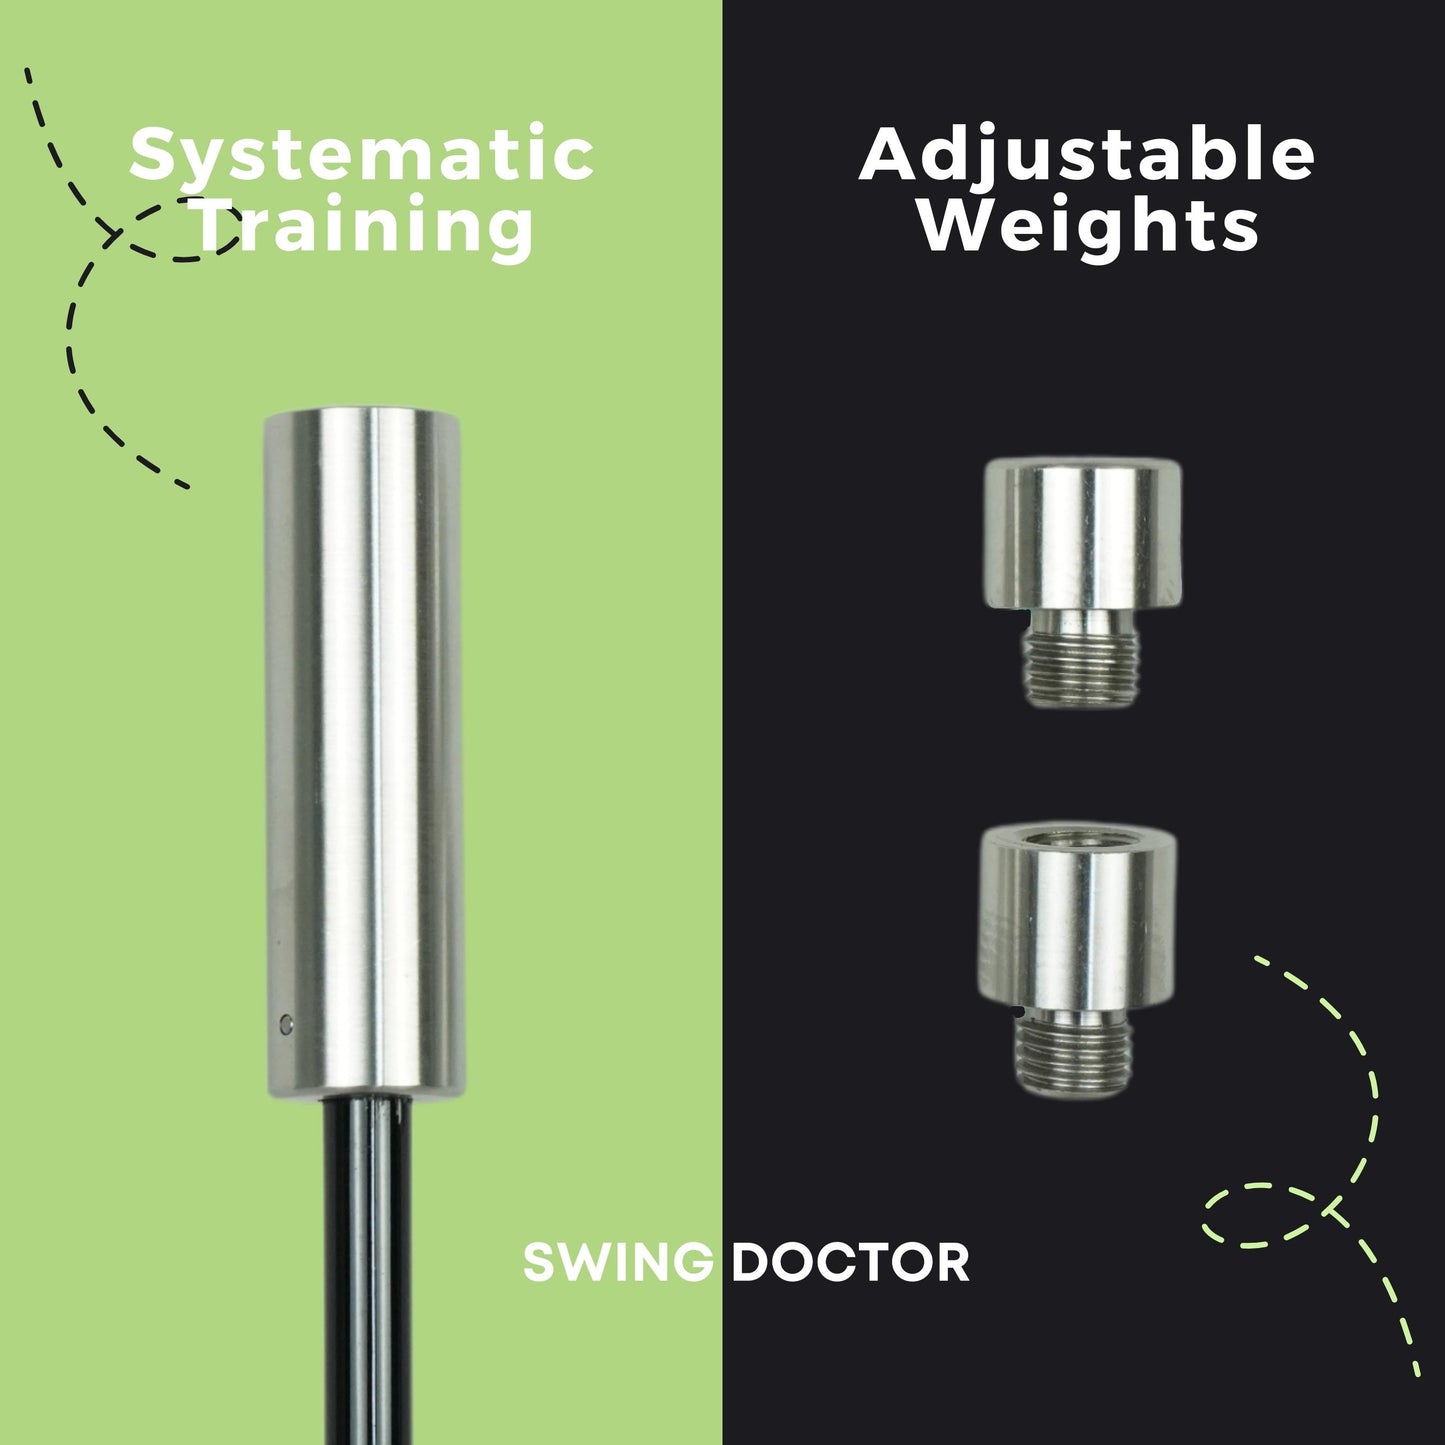 SWING DOCTOR Golf Swing Speed Training System - 3 Training Weights in 1 Club